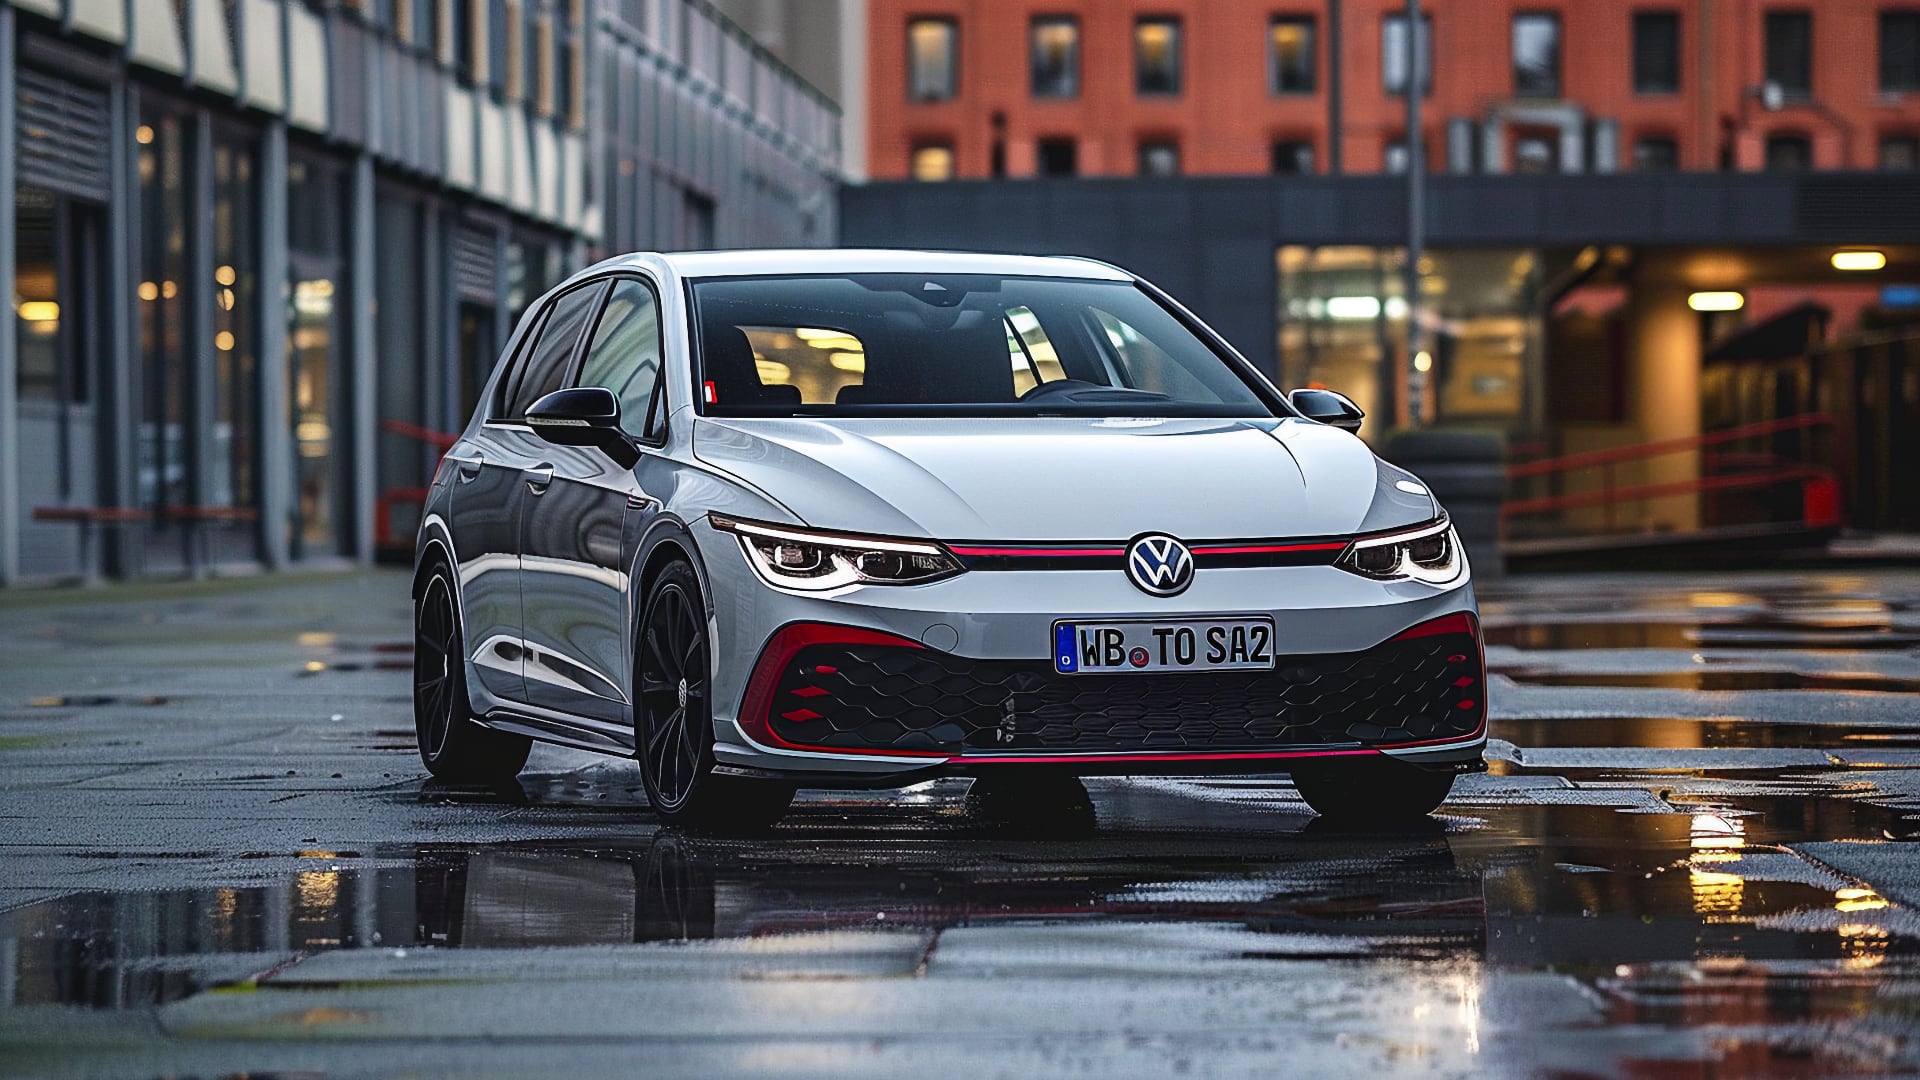 The 2019 Volkswagen Golf GTI, a model year to avoid, is parked on a wet street.